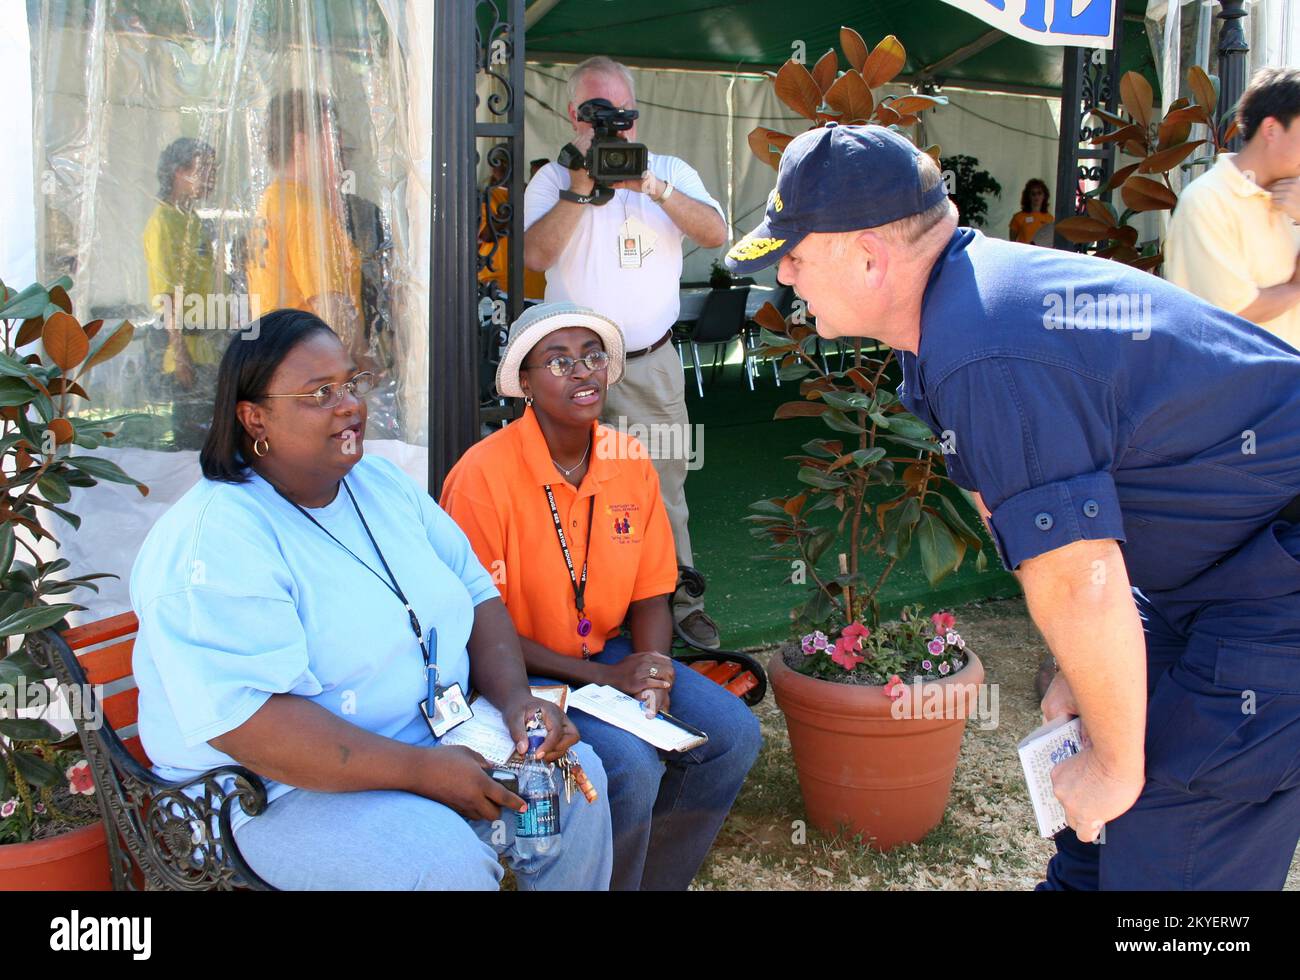 Hurricane Katrina/Hurricane Rita, Baker, LA October 8, 2005 - USCG Vice Admiral Thad Allen, Principal Federal Official for FEMA's Gulf Coast recovery efforts, talks with two New Orleans evacuees at the new 573-unit trailer park fifteen miles north of Baton Rouge. Stock Photo